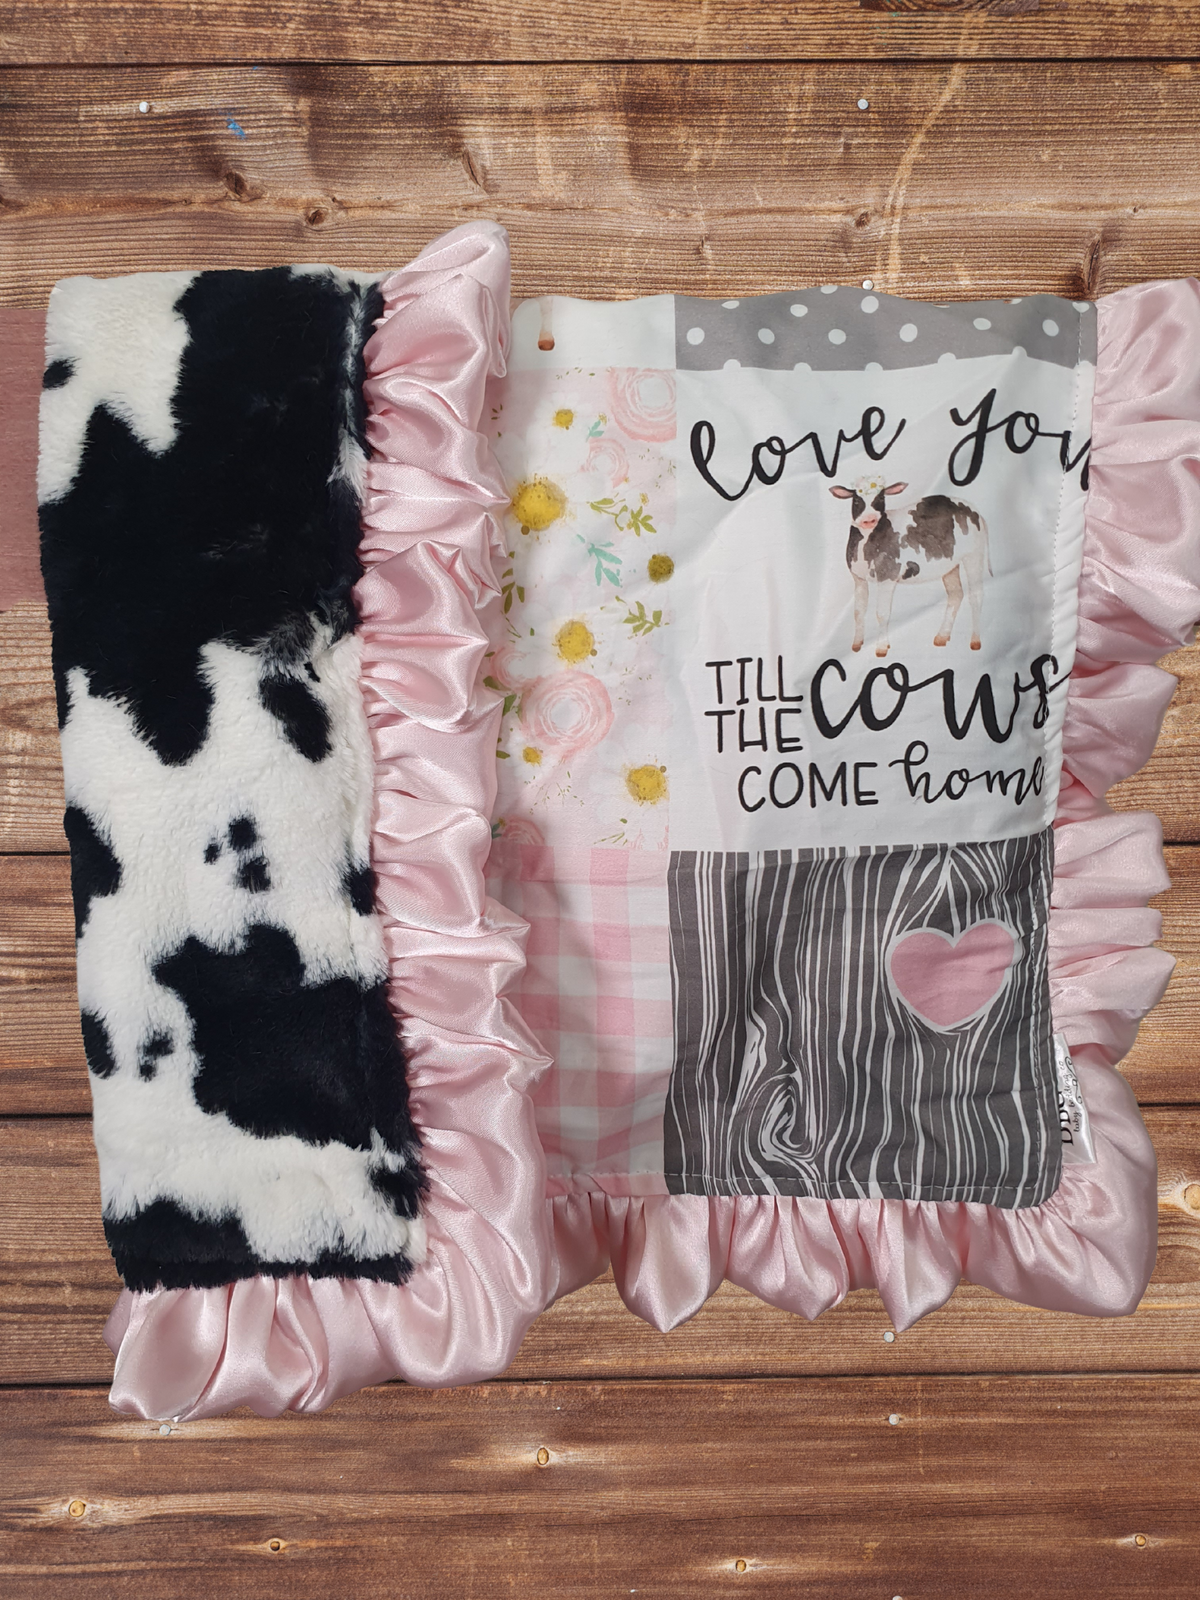 Baby Ruffle Blanket - Blush Cows Come Home and Black White Cow Minky Farm Blanket - DBC Baby Bedding Co 